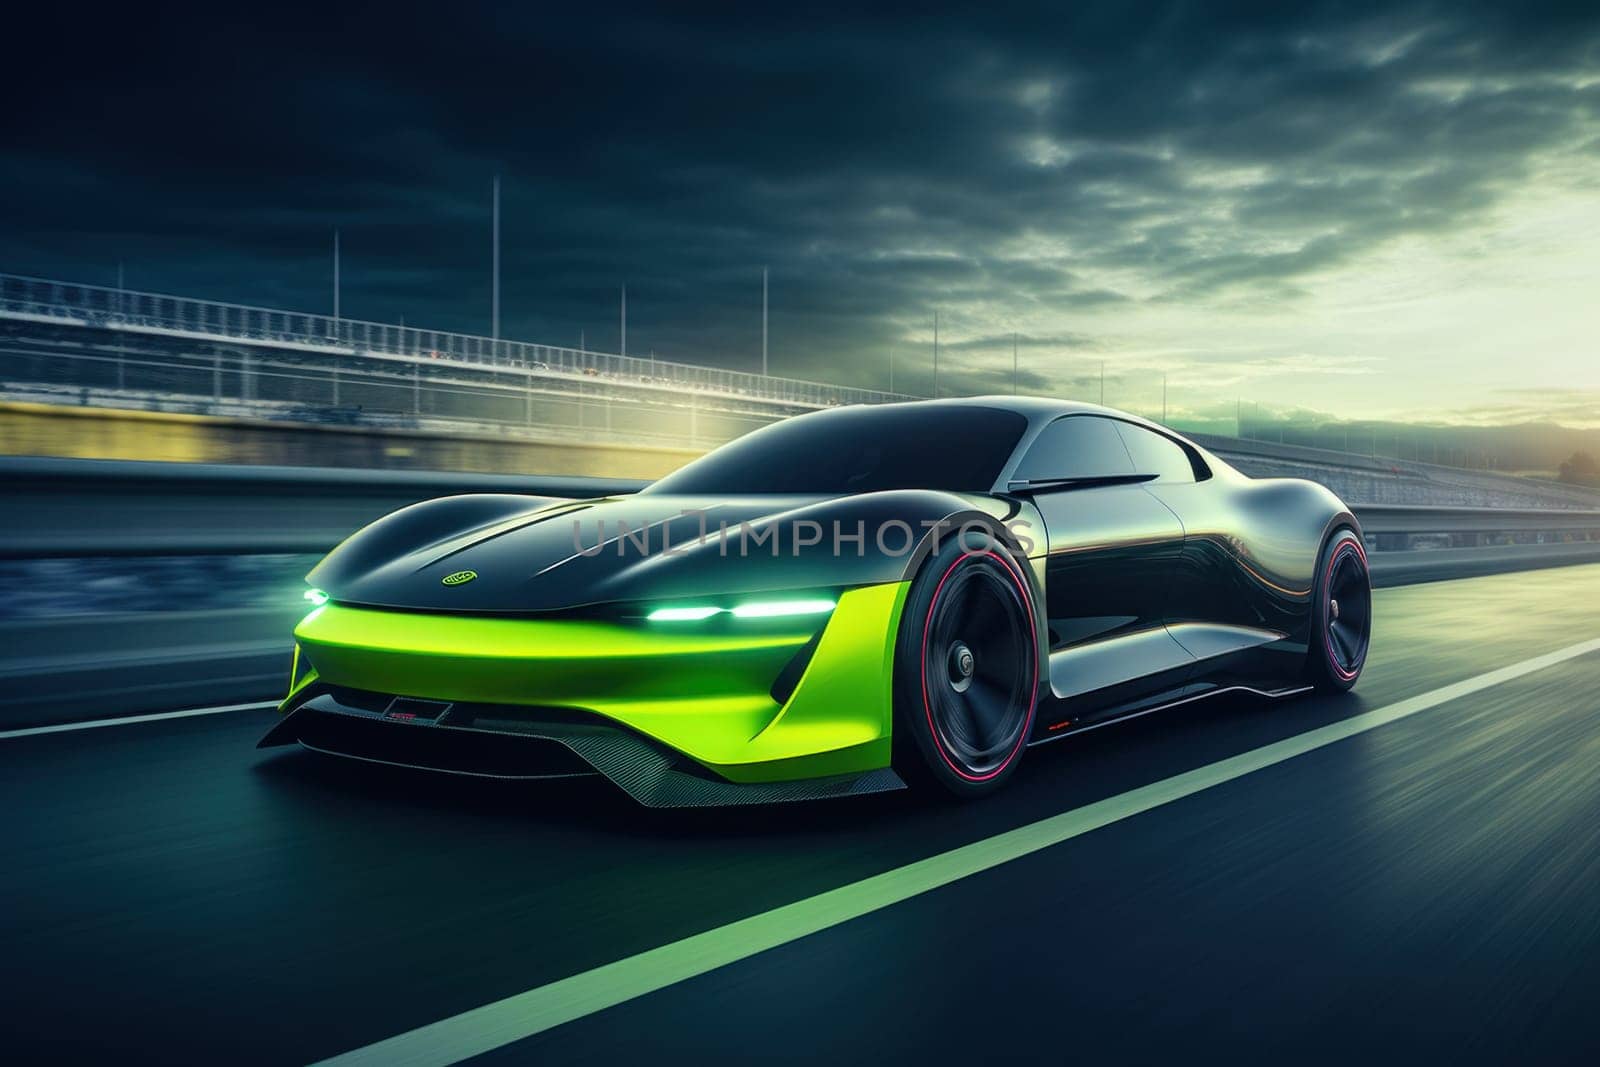 Showcase the futuristic power of a light green and black electric car speeding down a sleek highway.